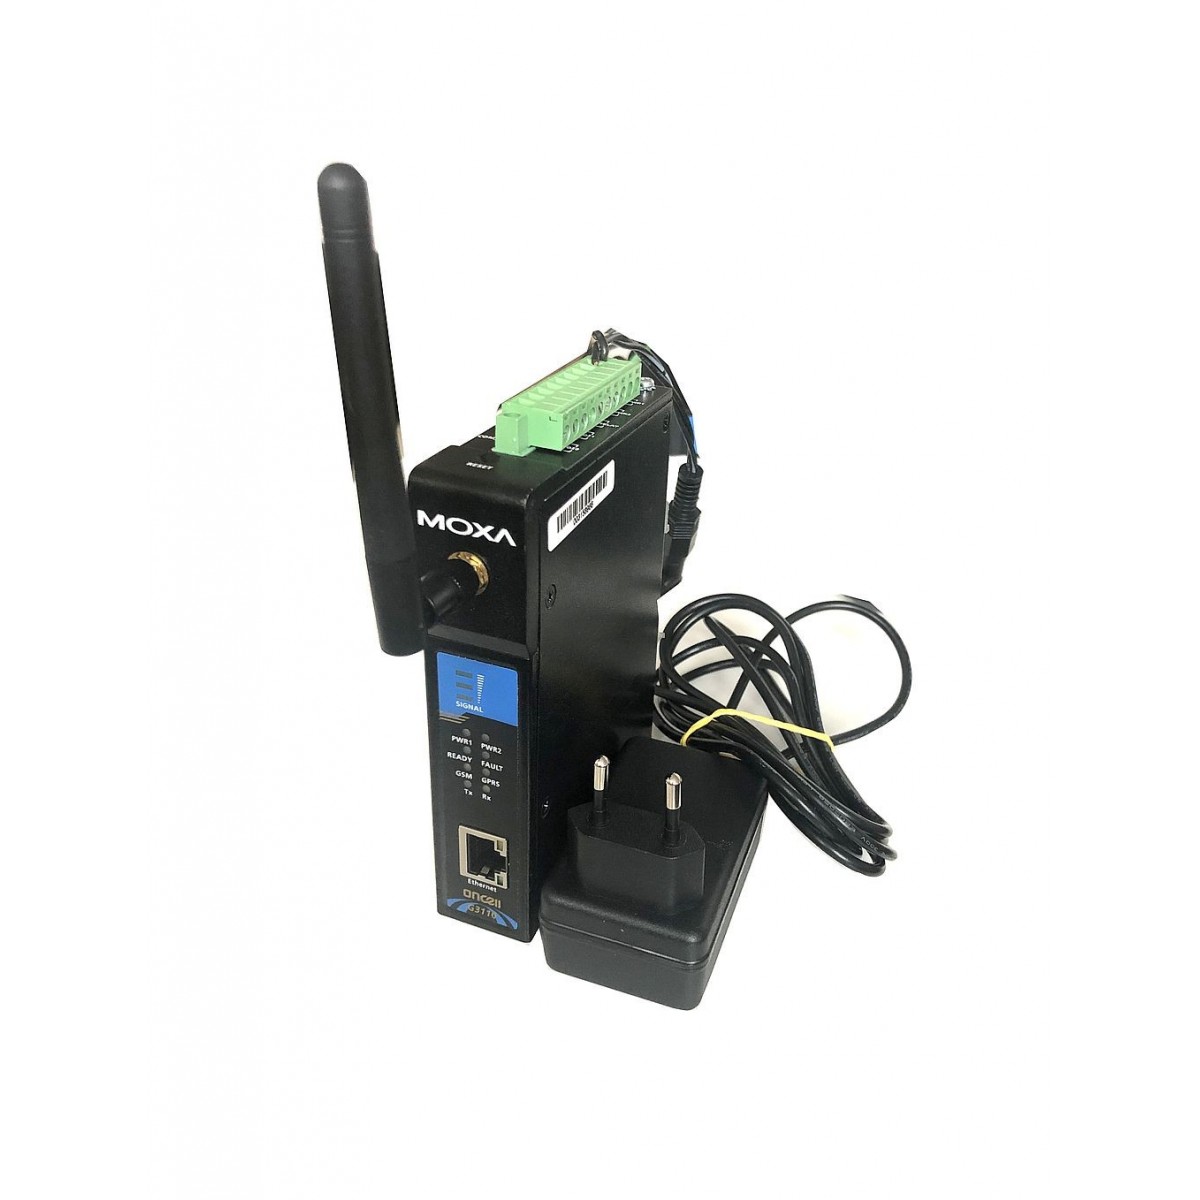 ROUTER MODEM MOXA ONCELL G3110-HSPA